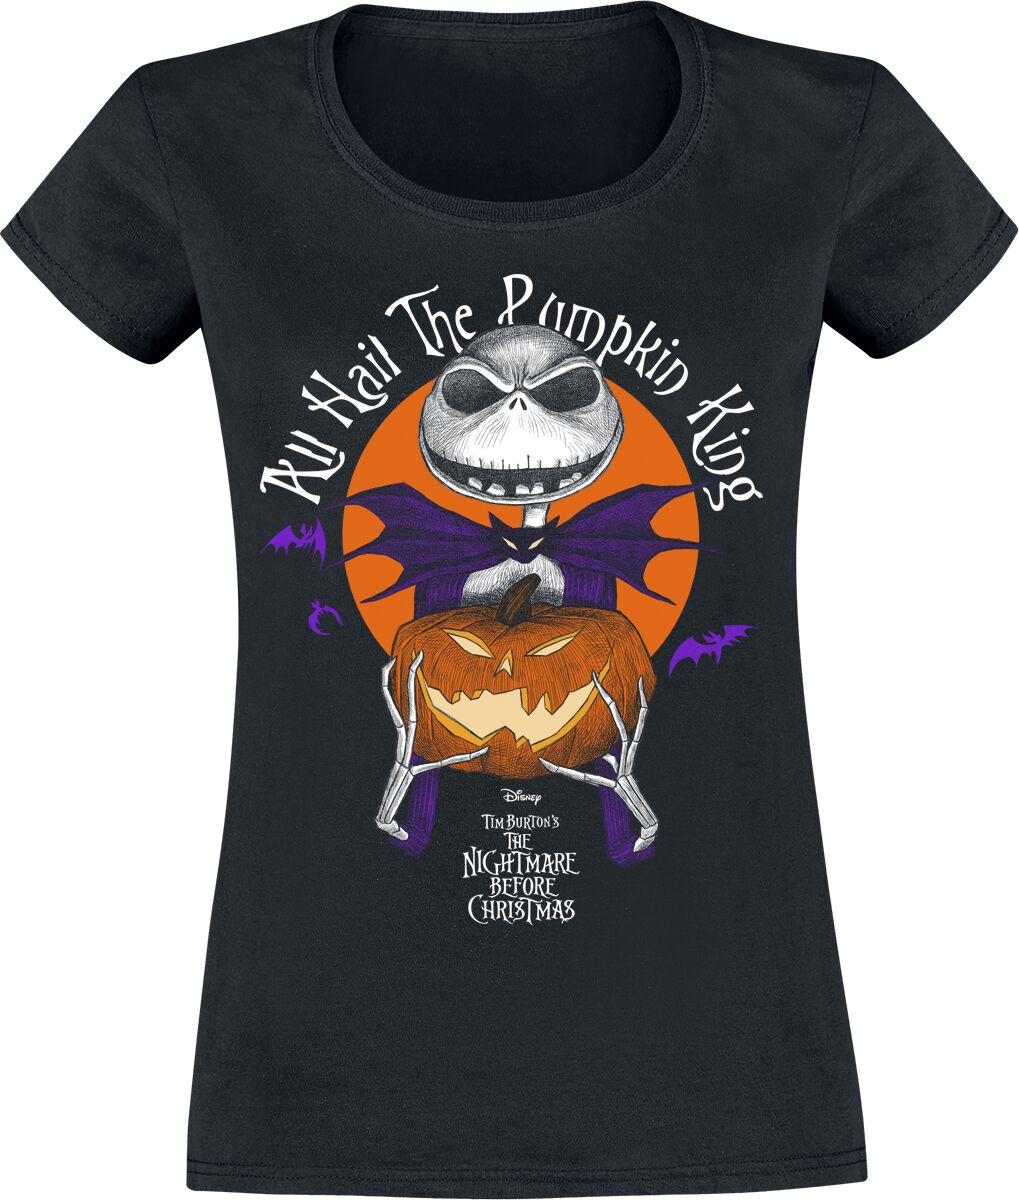 The Nightmare Before Christmas All Hail The Pumpkin King T-Shirt schwarz in M